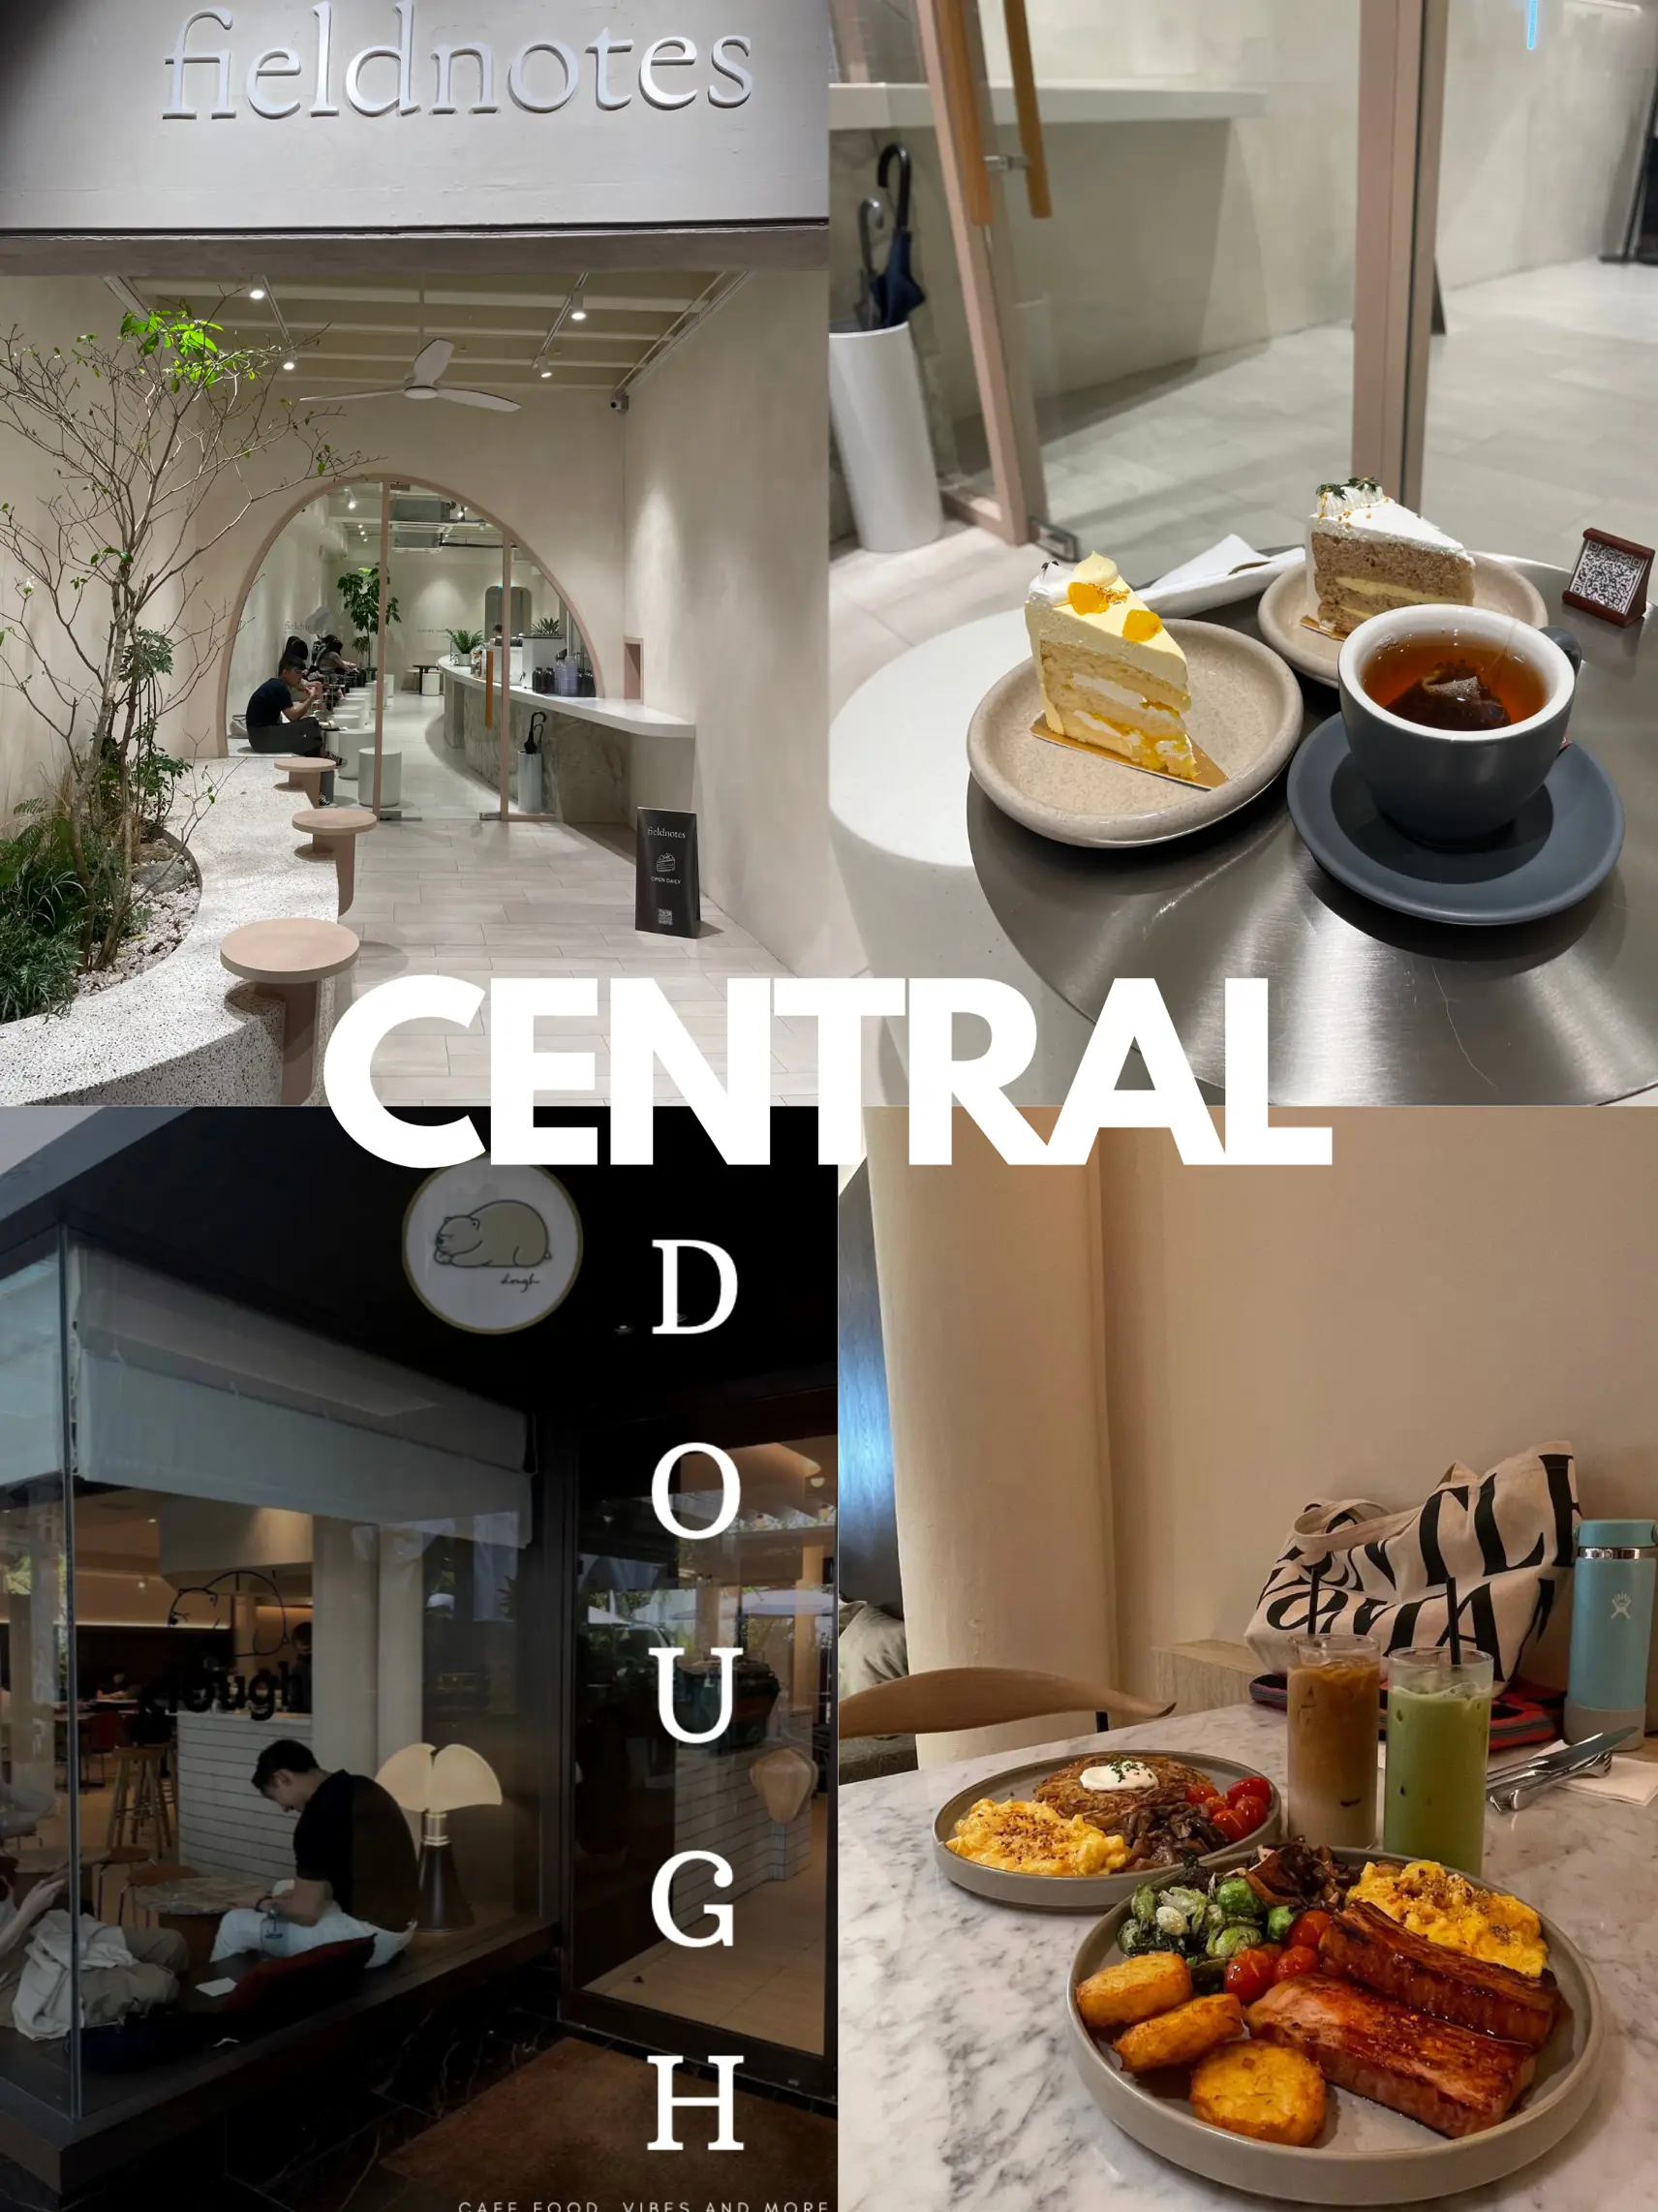 My cafe top picks around sg 🍵🍝🧇's images(1)